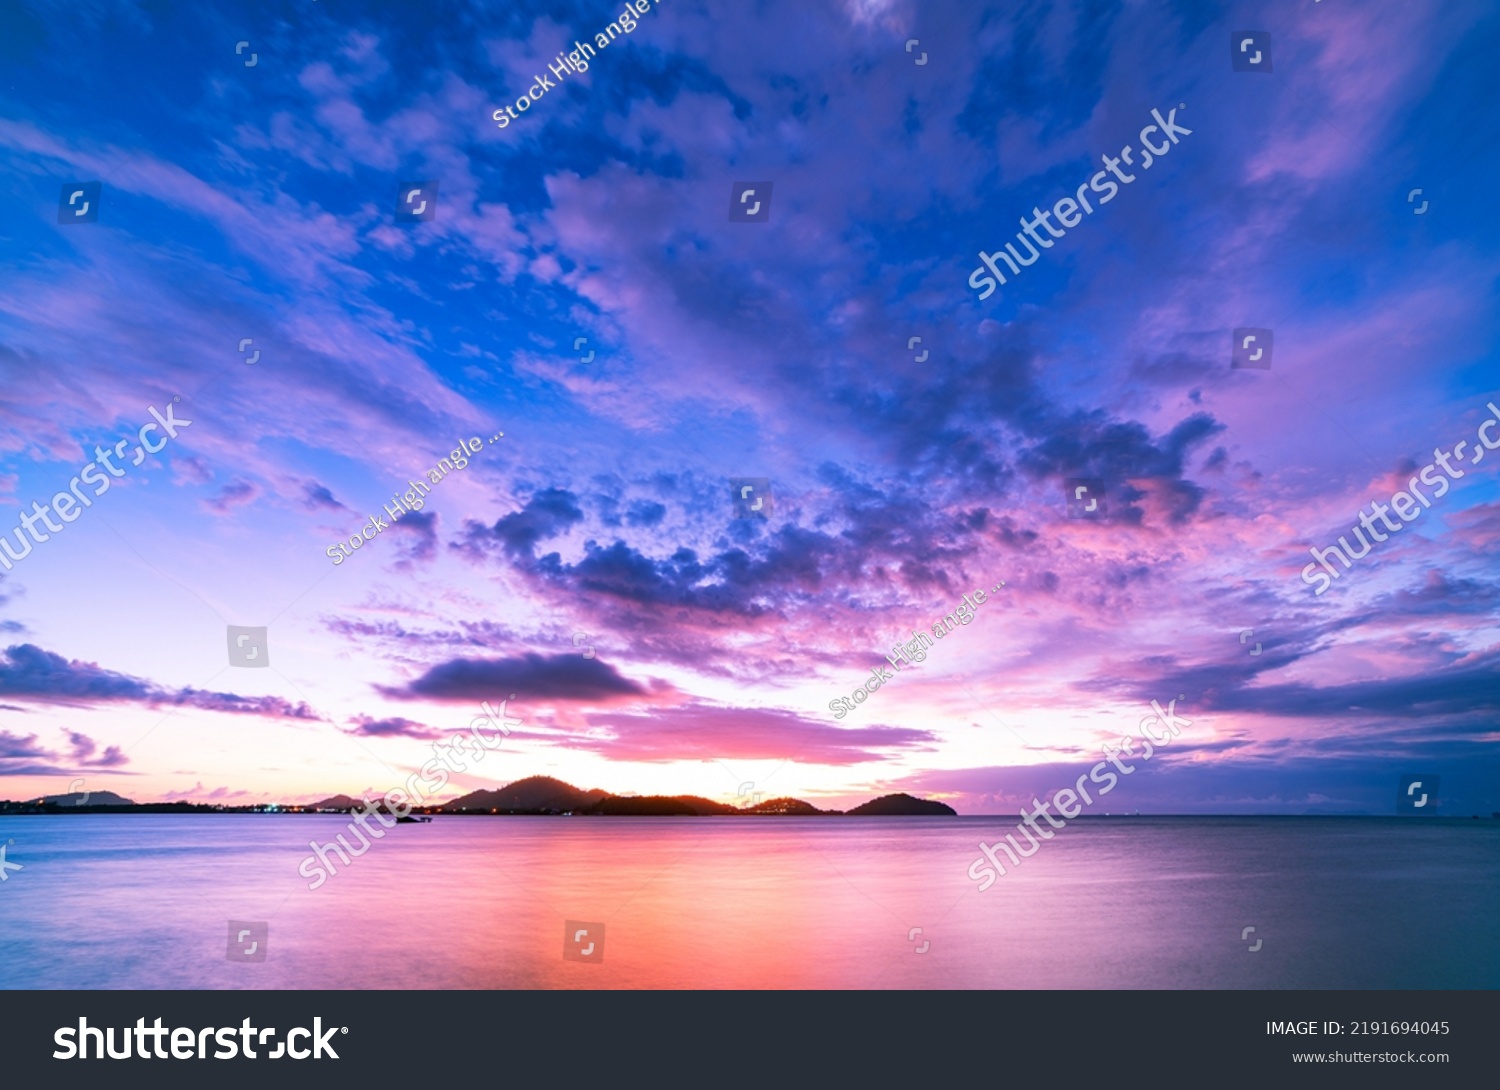 Landscape Long exposure of majestic clouds in the sky sunset or sunrise over sea with reflection in the tropical sea.Beautiful cloudscape scenery.Amazing light of nature Landscape nature background #2191694045